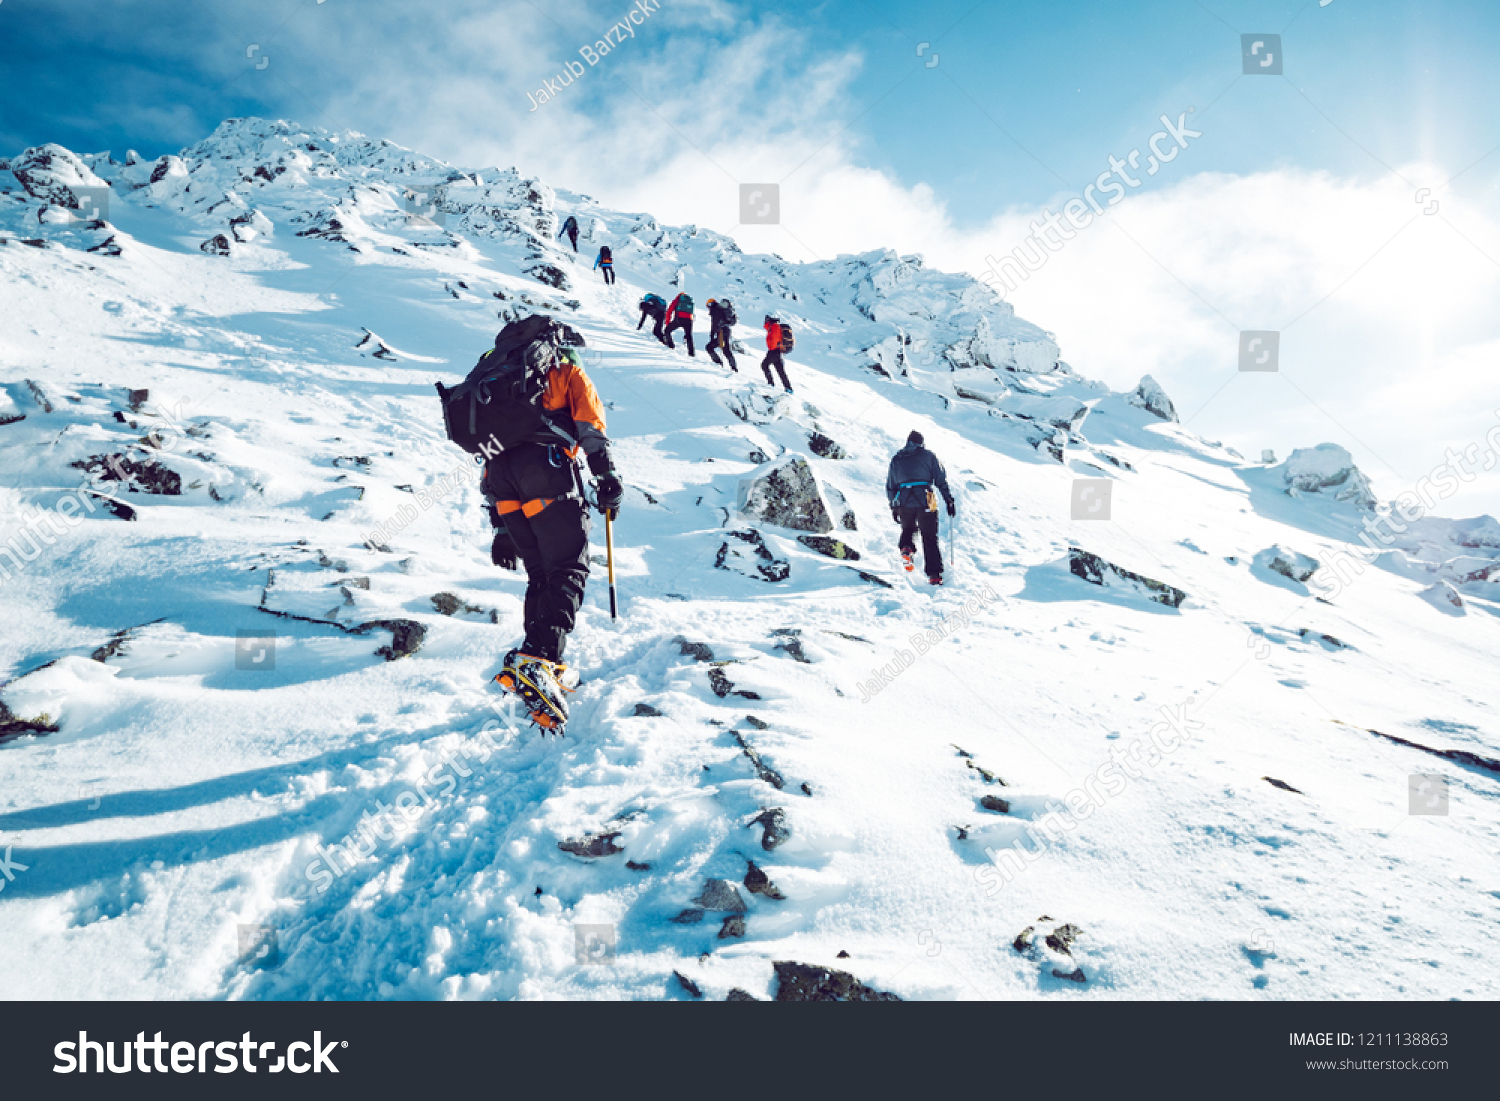 A group of climbers ascending a mountain in winter #1211138863